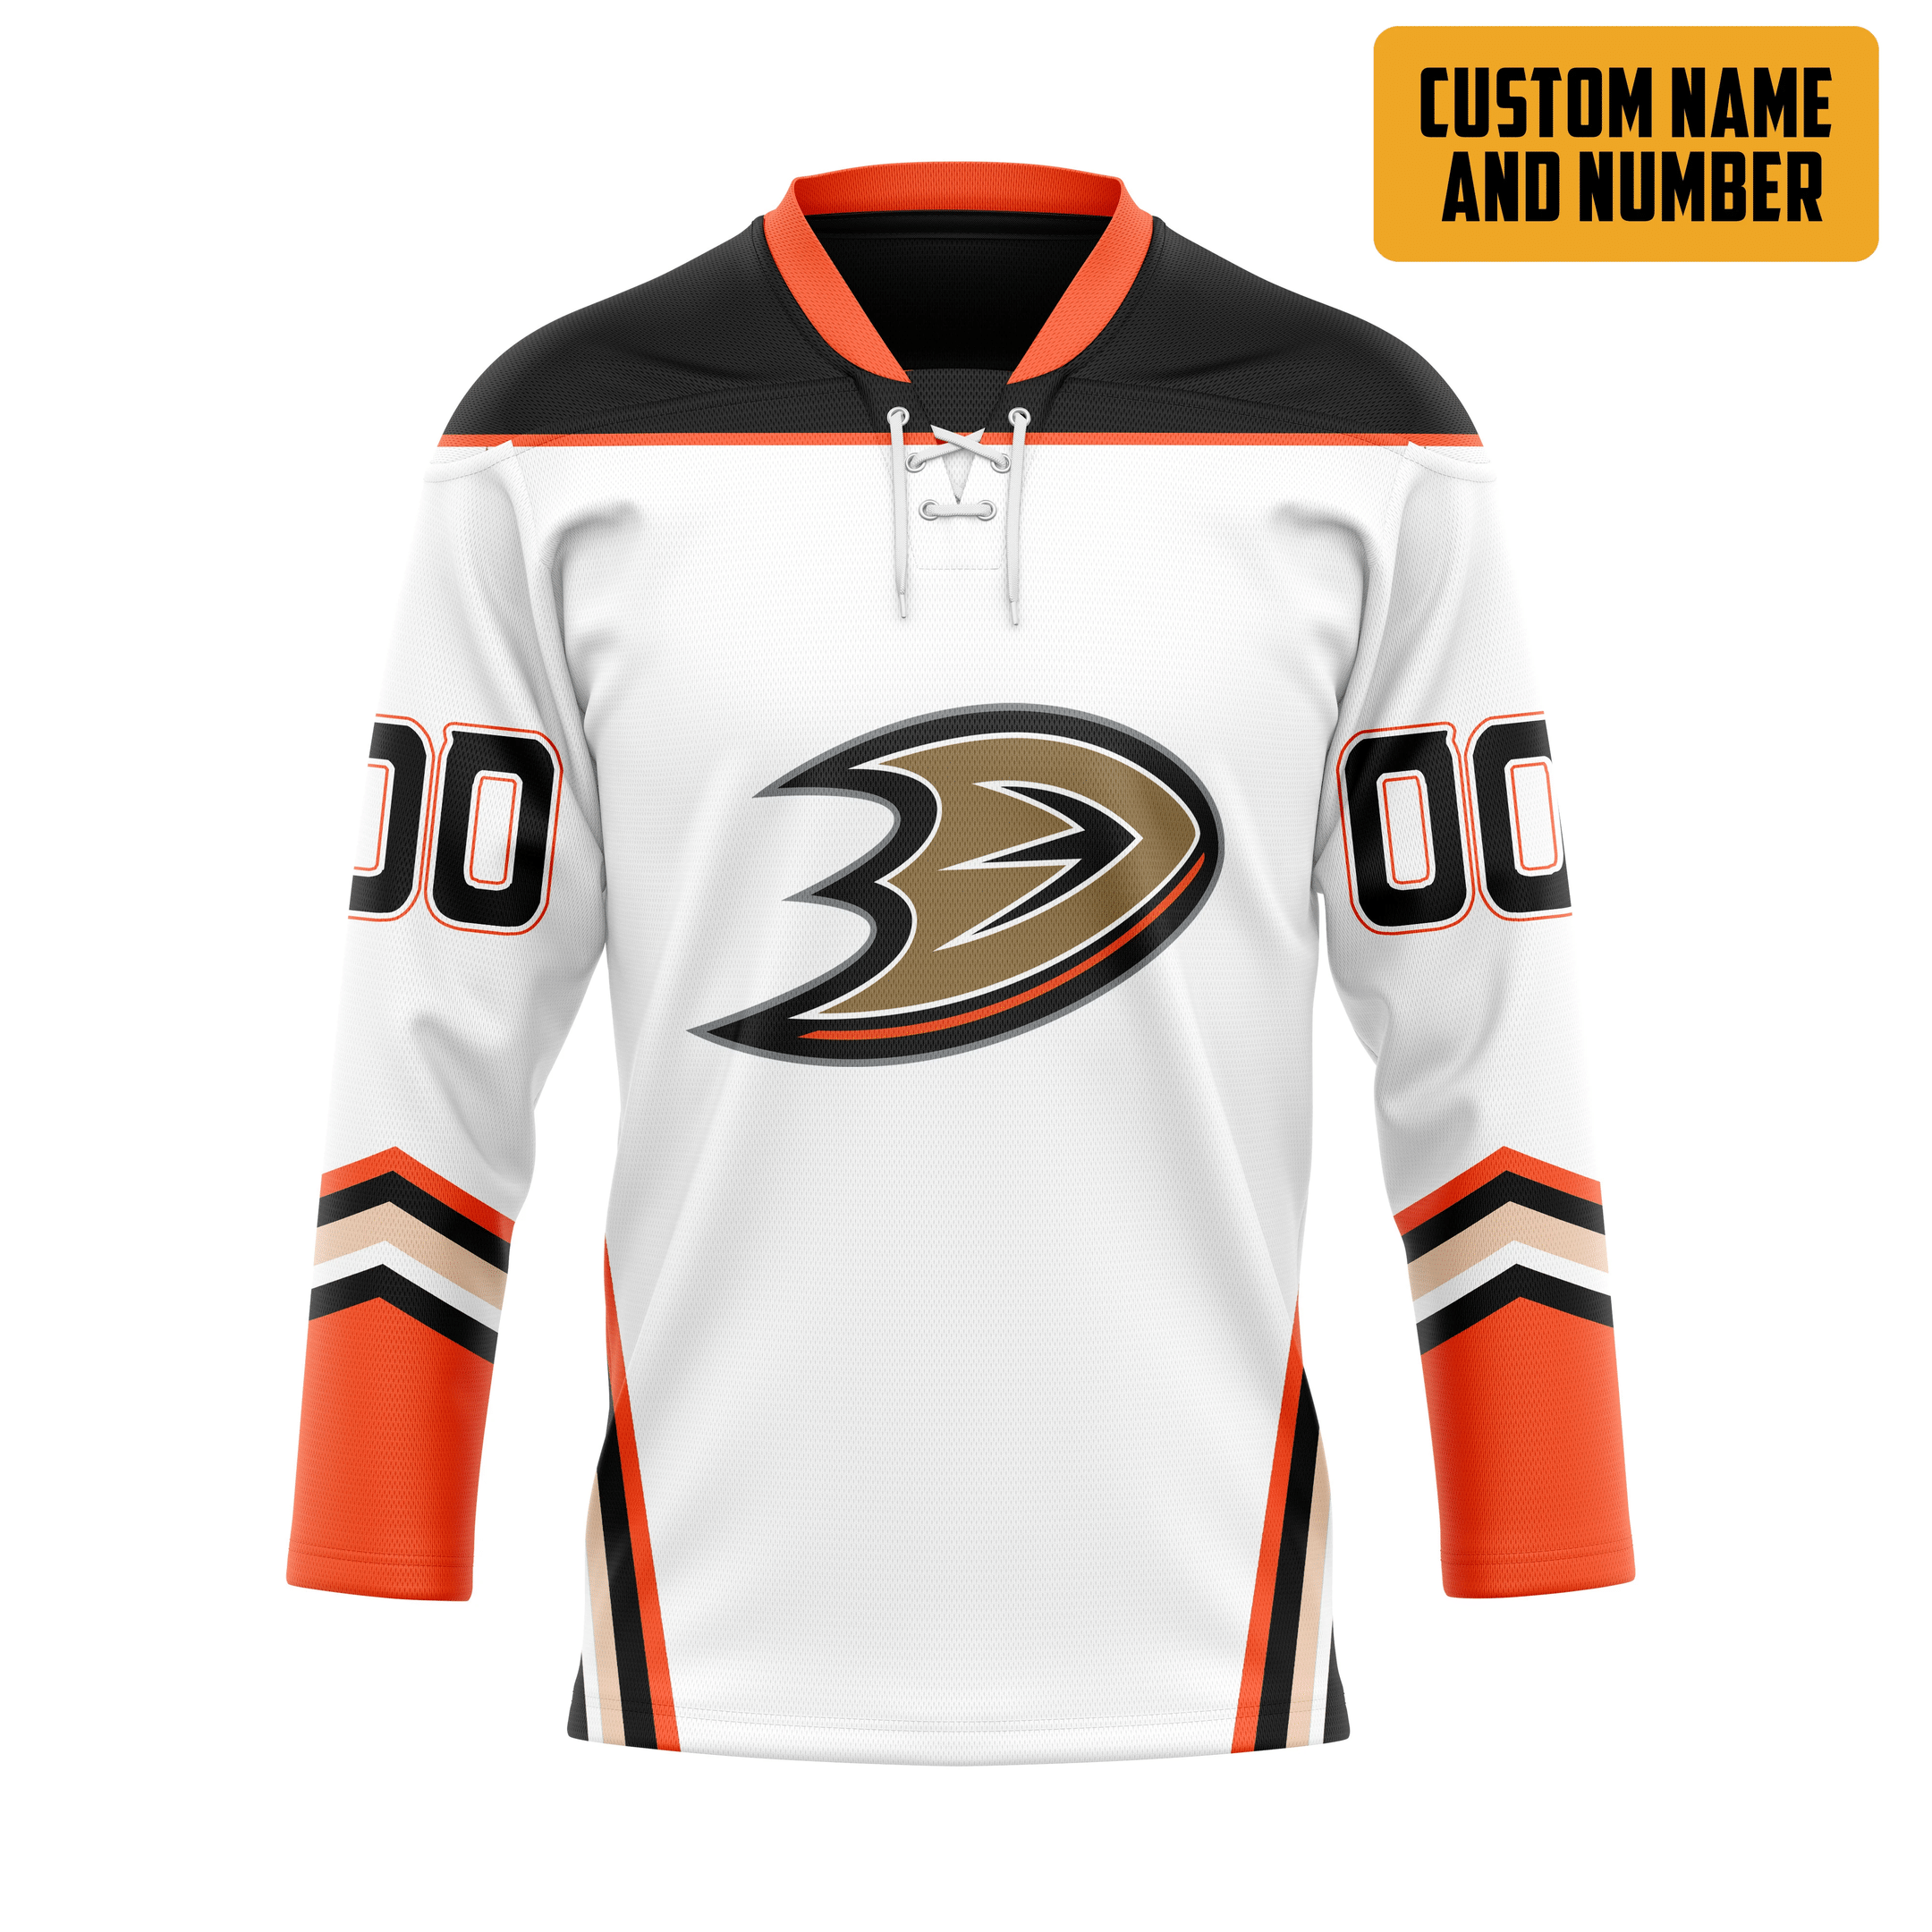 The style of a hockey jersey should match your personality. 80